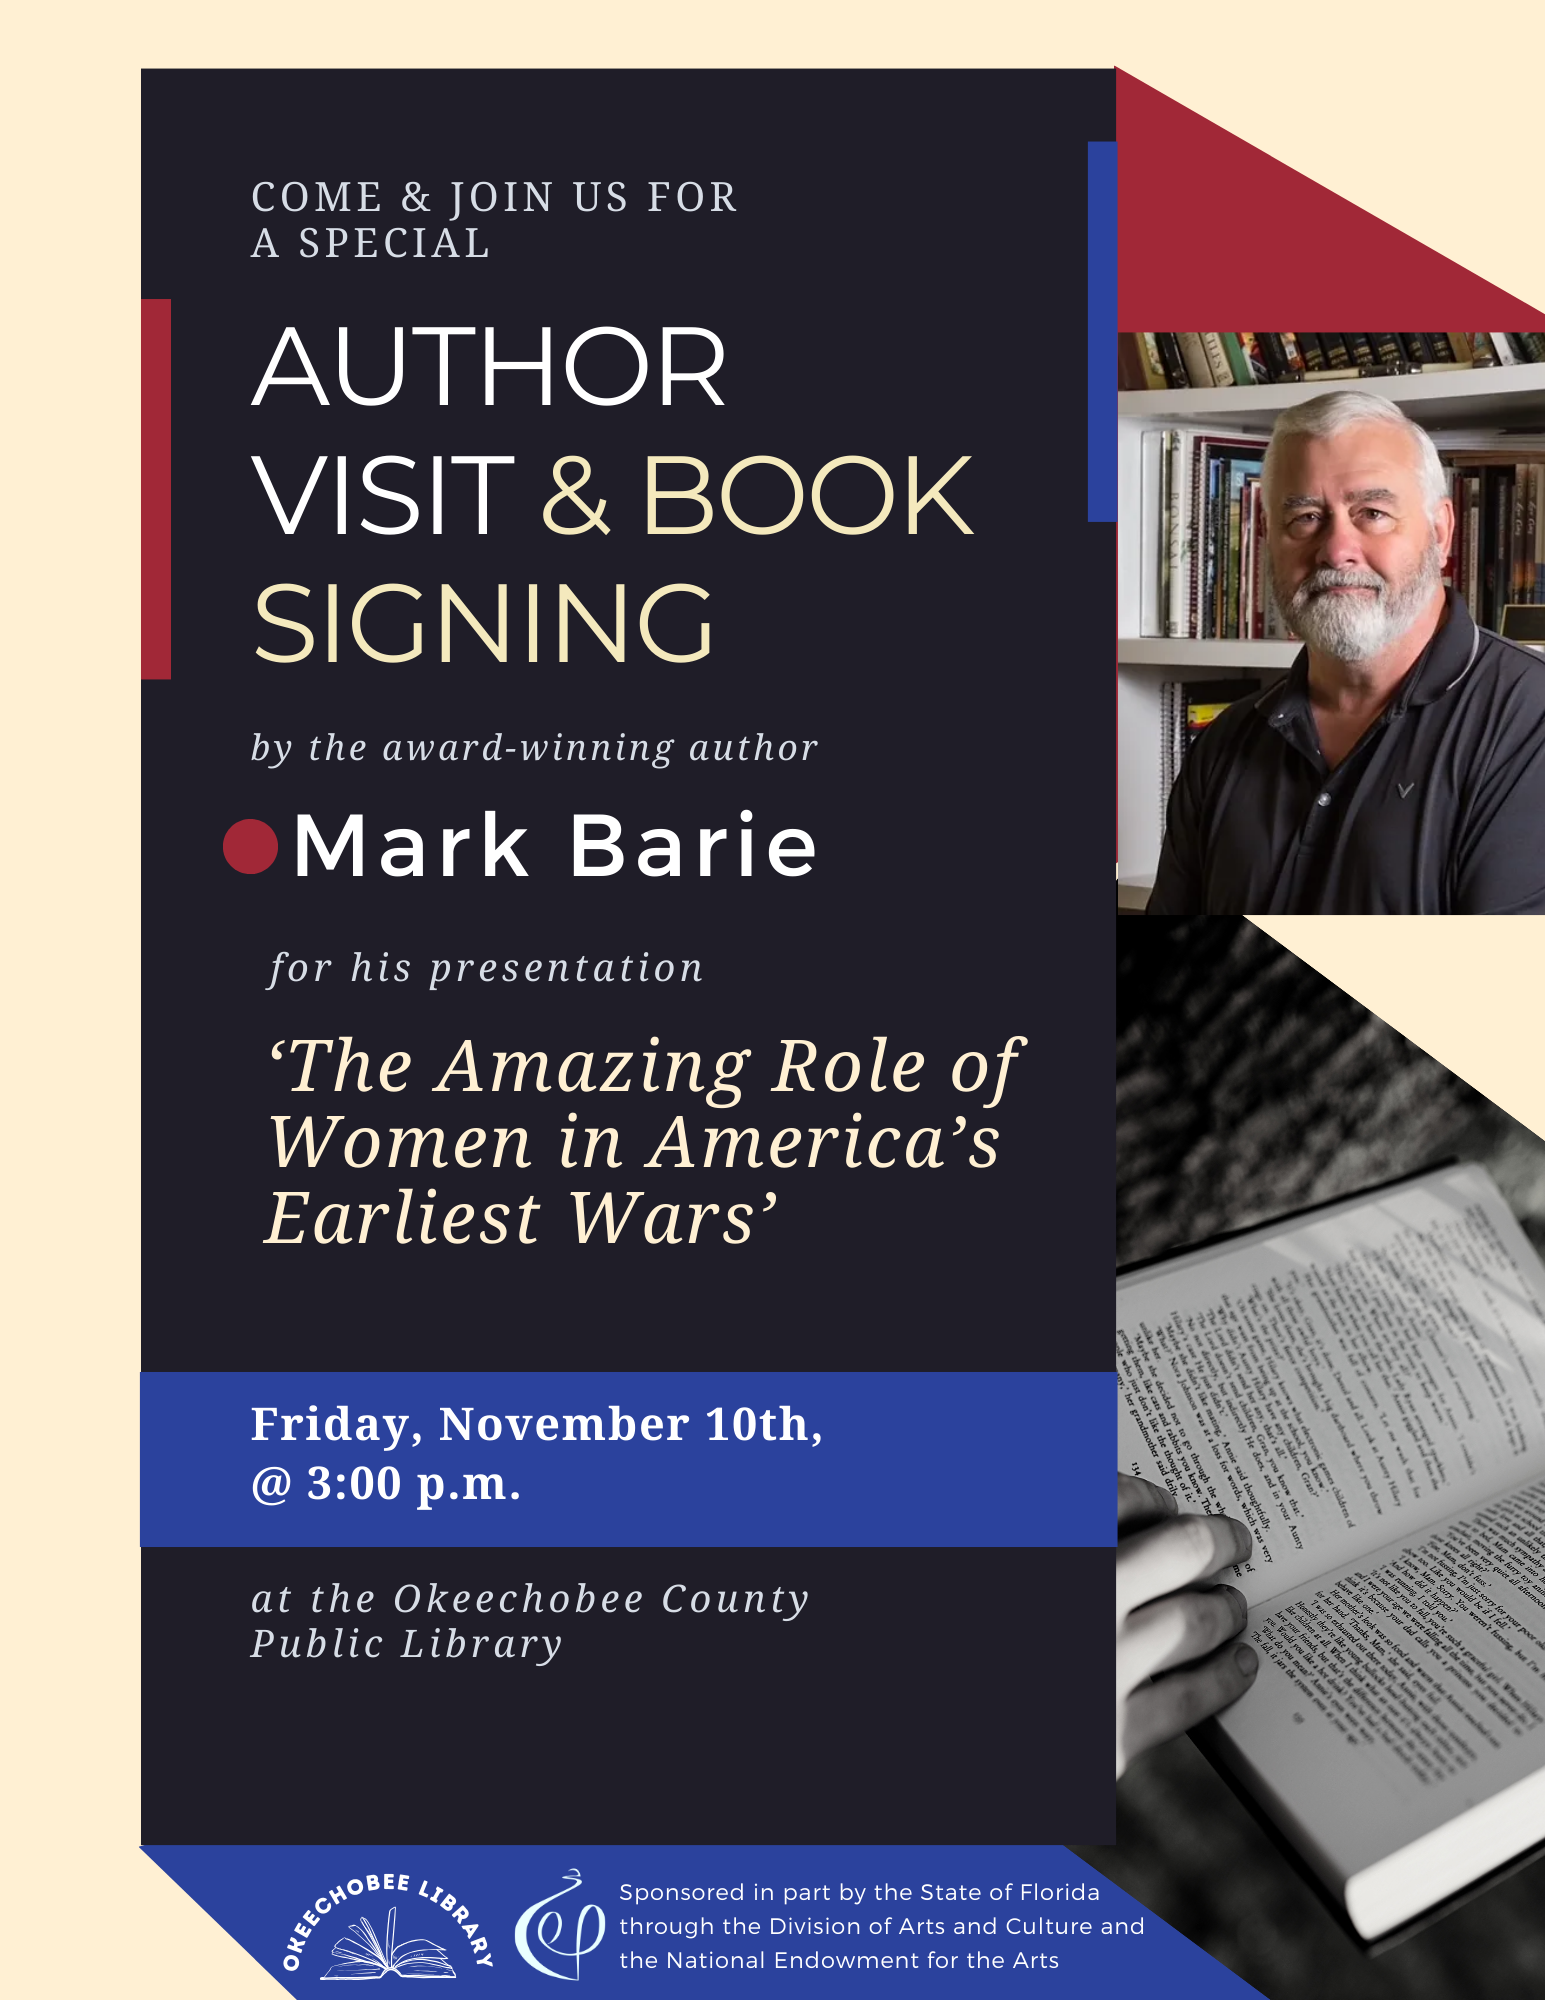 Join us at the Okeechobee Library on Friday, November 10th at 3pm for an author visit and signing from author Mark Barie